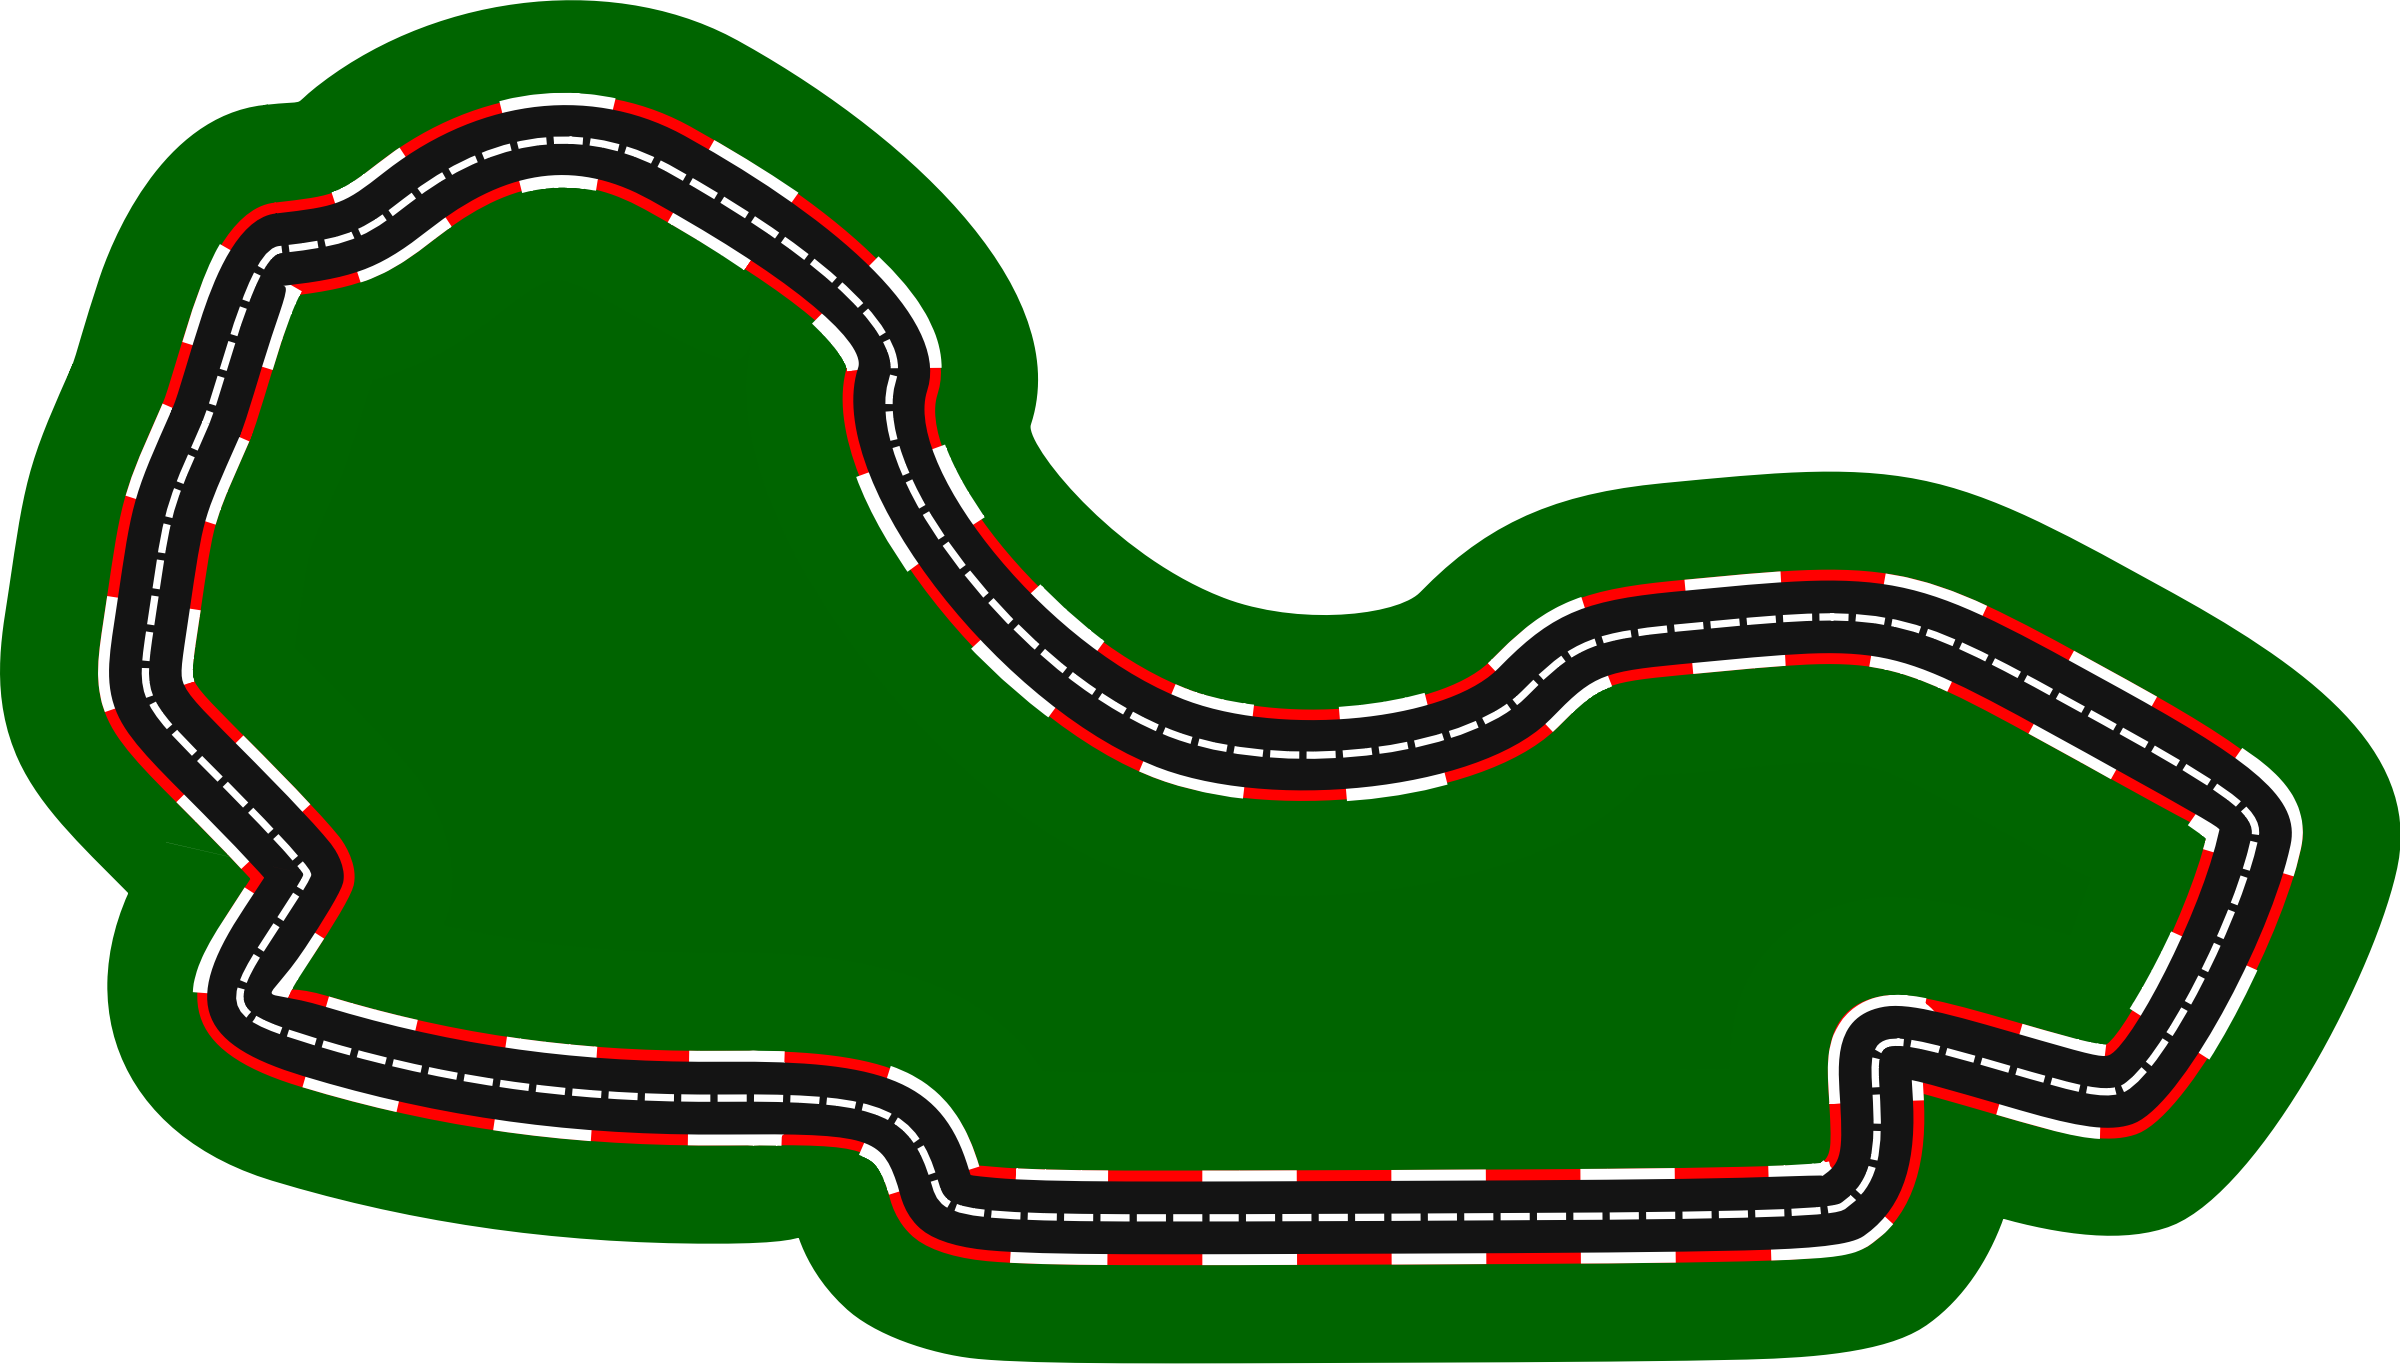 Track clipart race course, Track race course Transparent FREE for